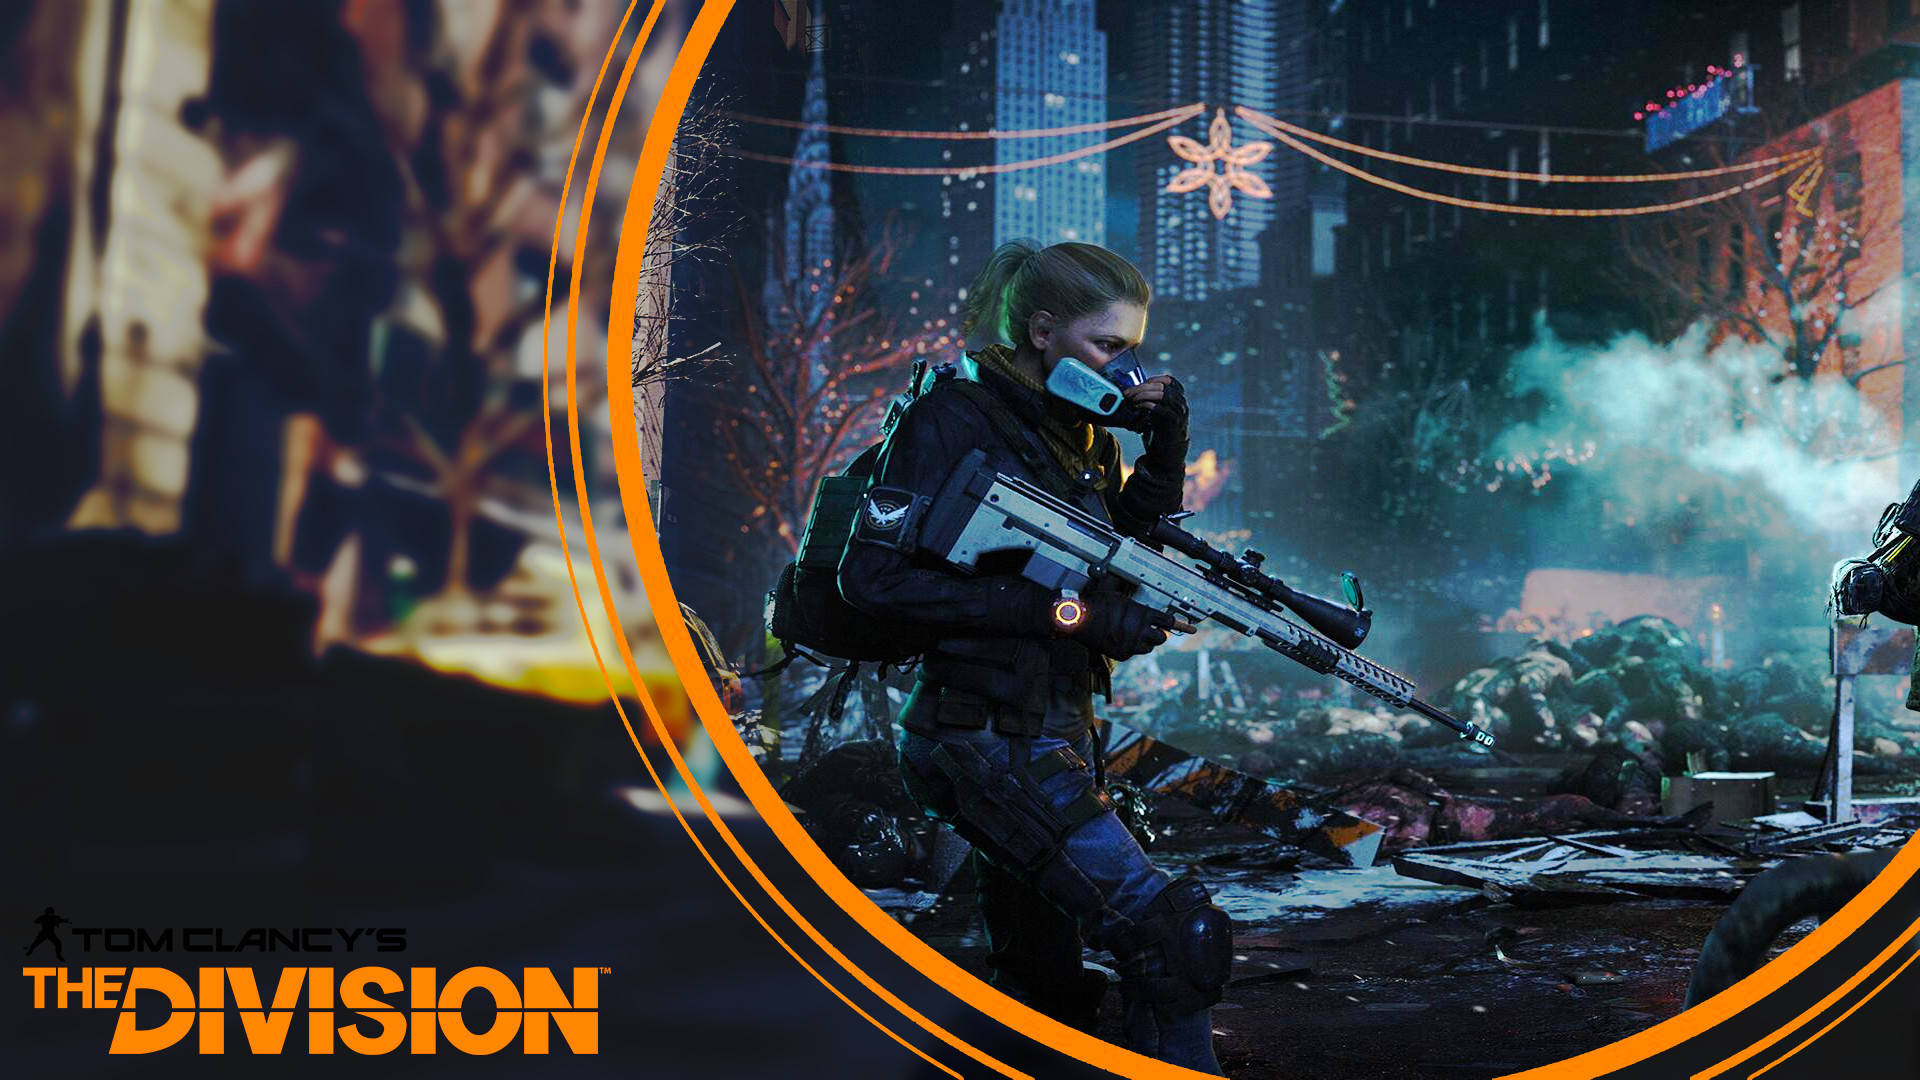 Free The Division 4k Wallpaper Downloads, [100+] The Division 4k Wallpapers  for FREE 